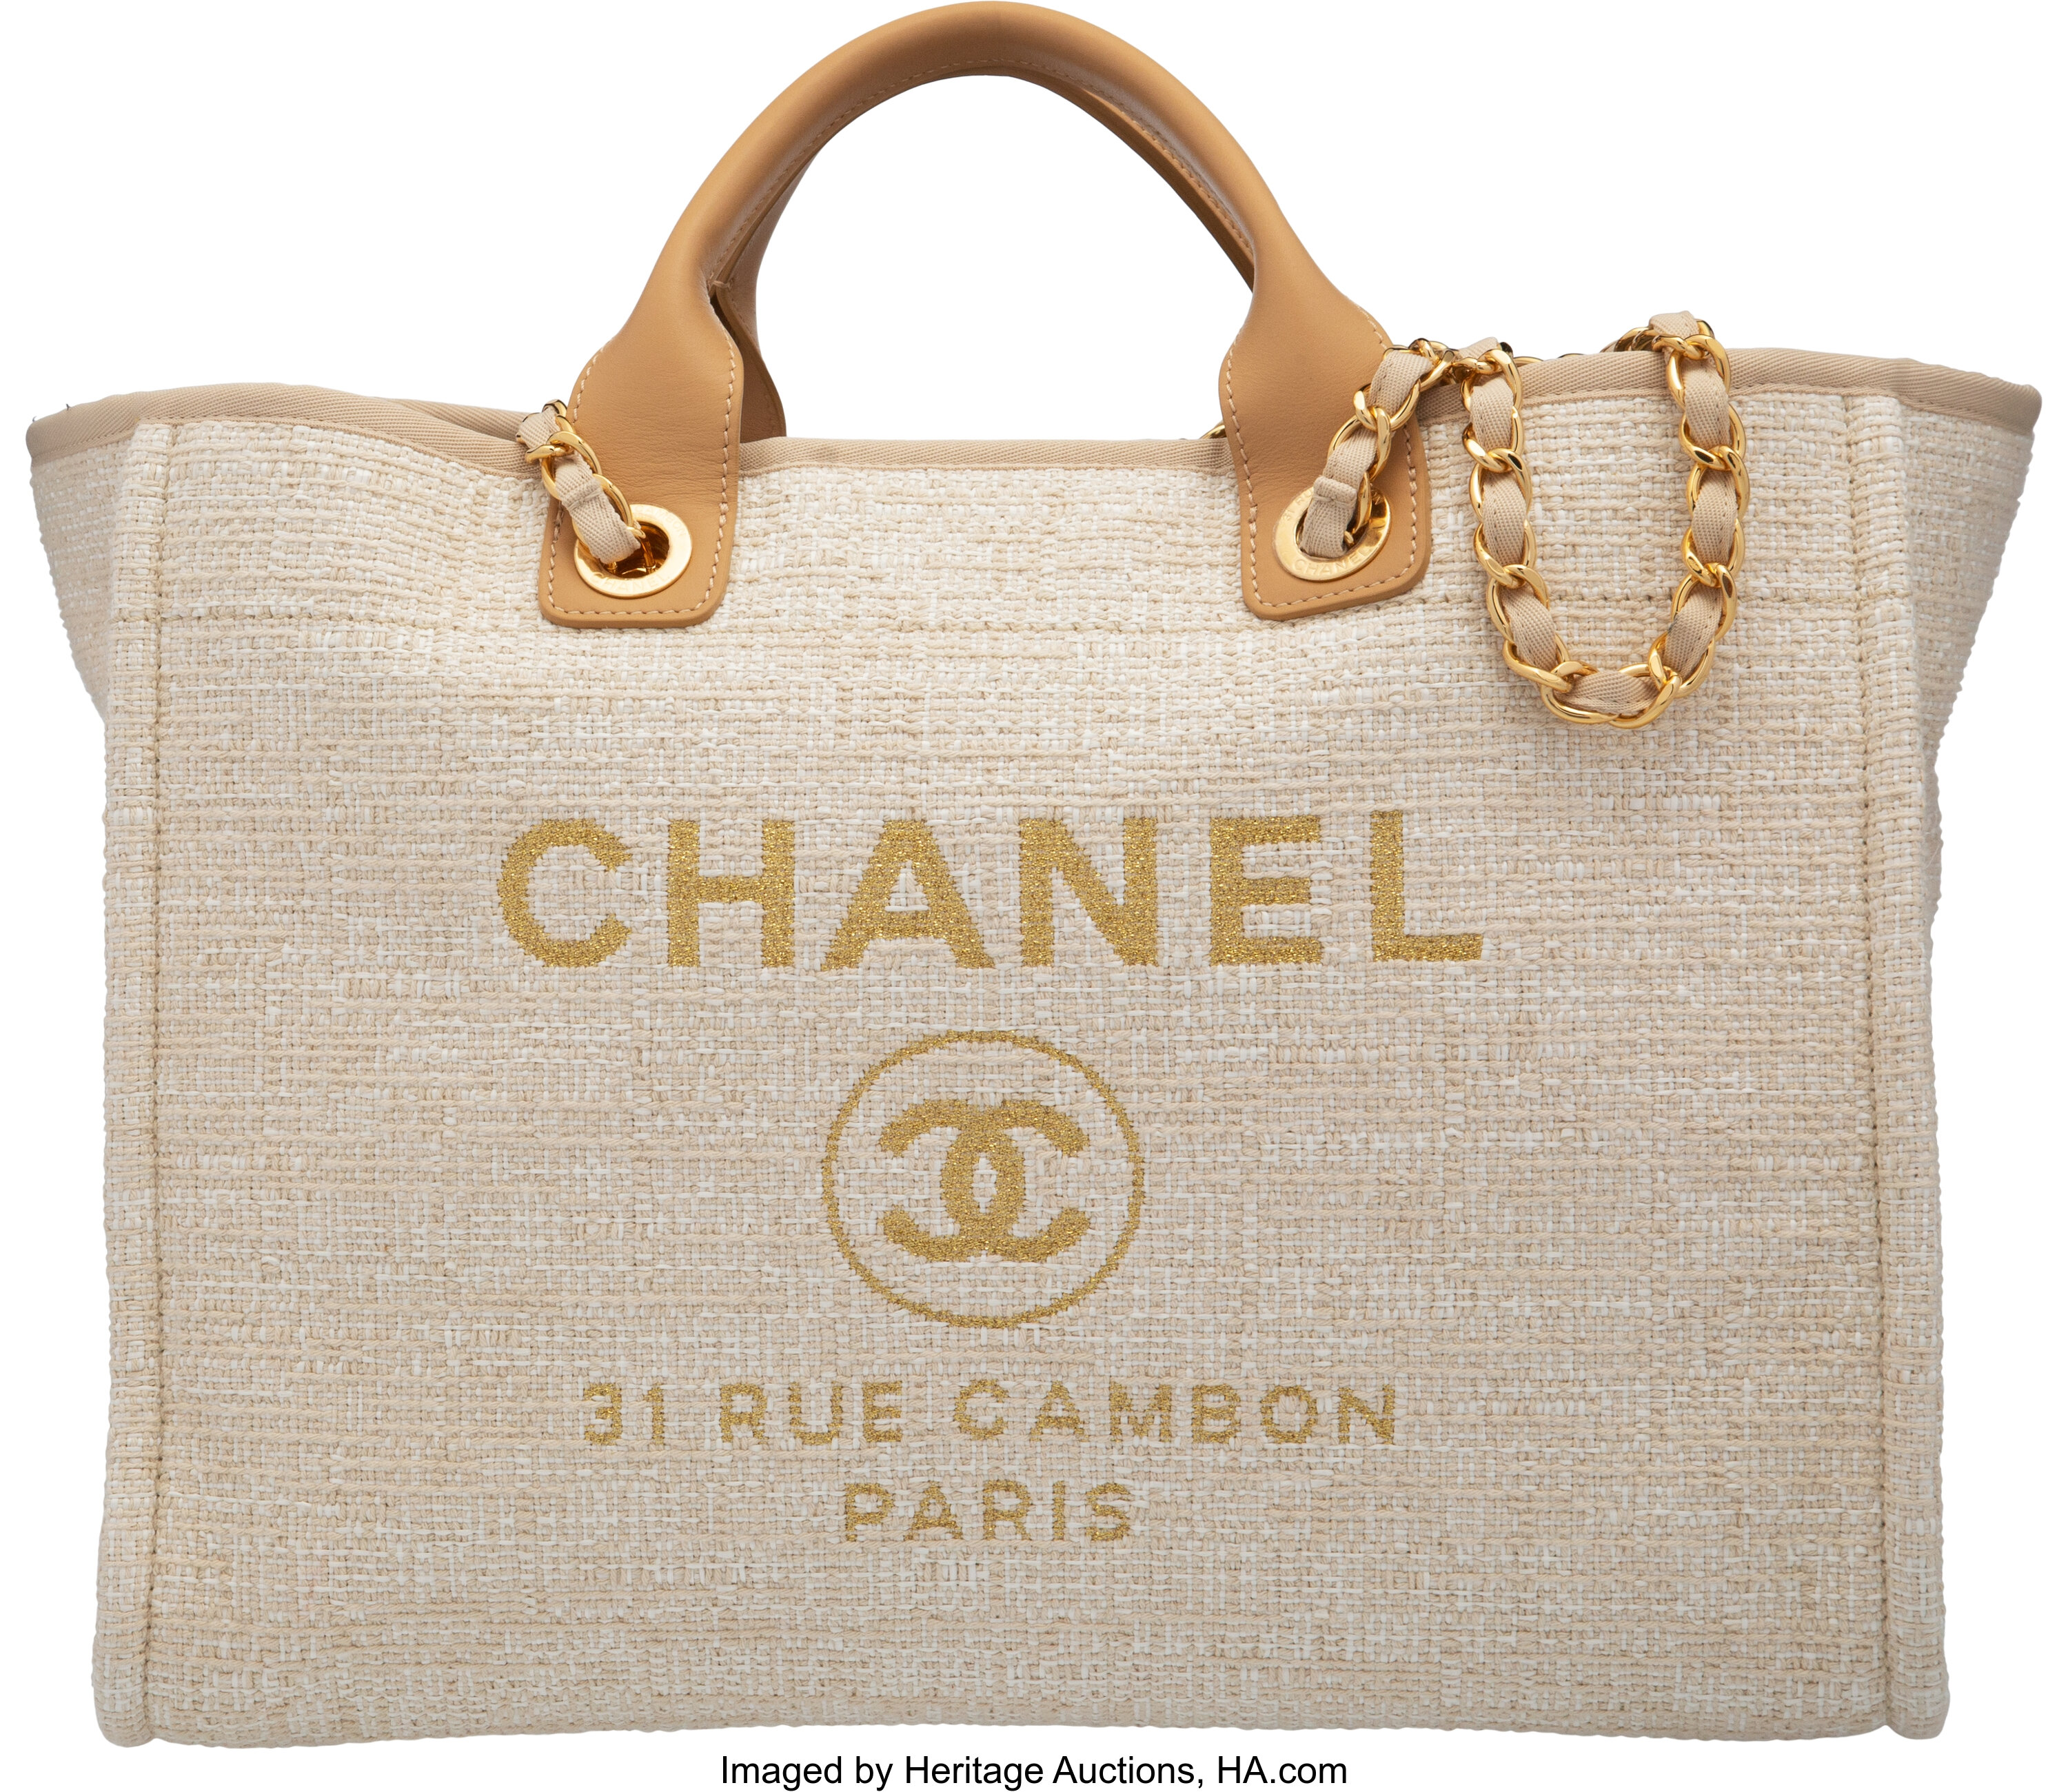 Chanel Beige Woven Straw Deauville Tote Bag with Gold Hardware., Lot  #58203